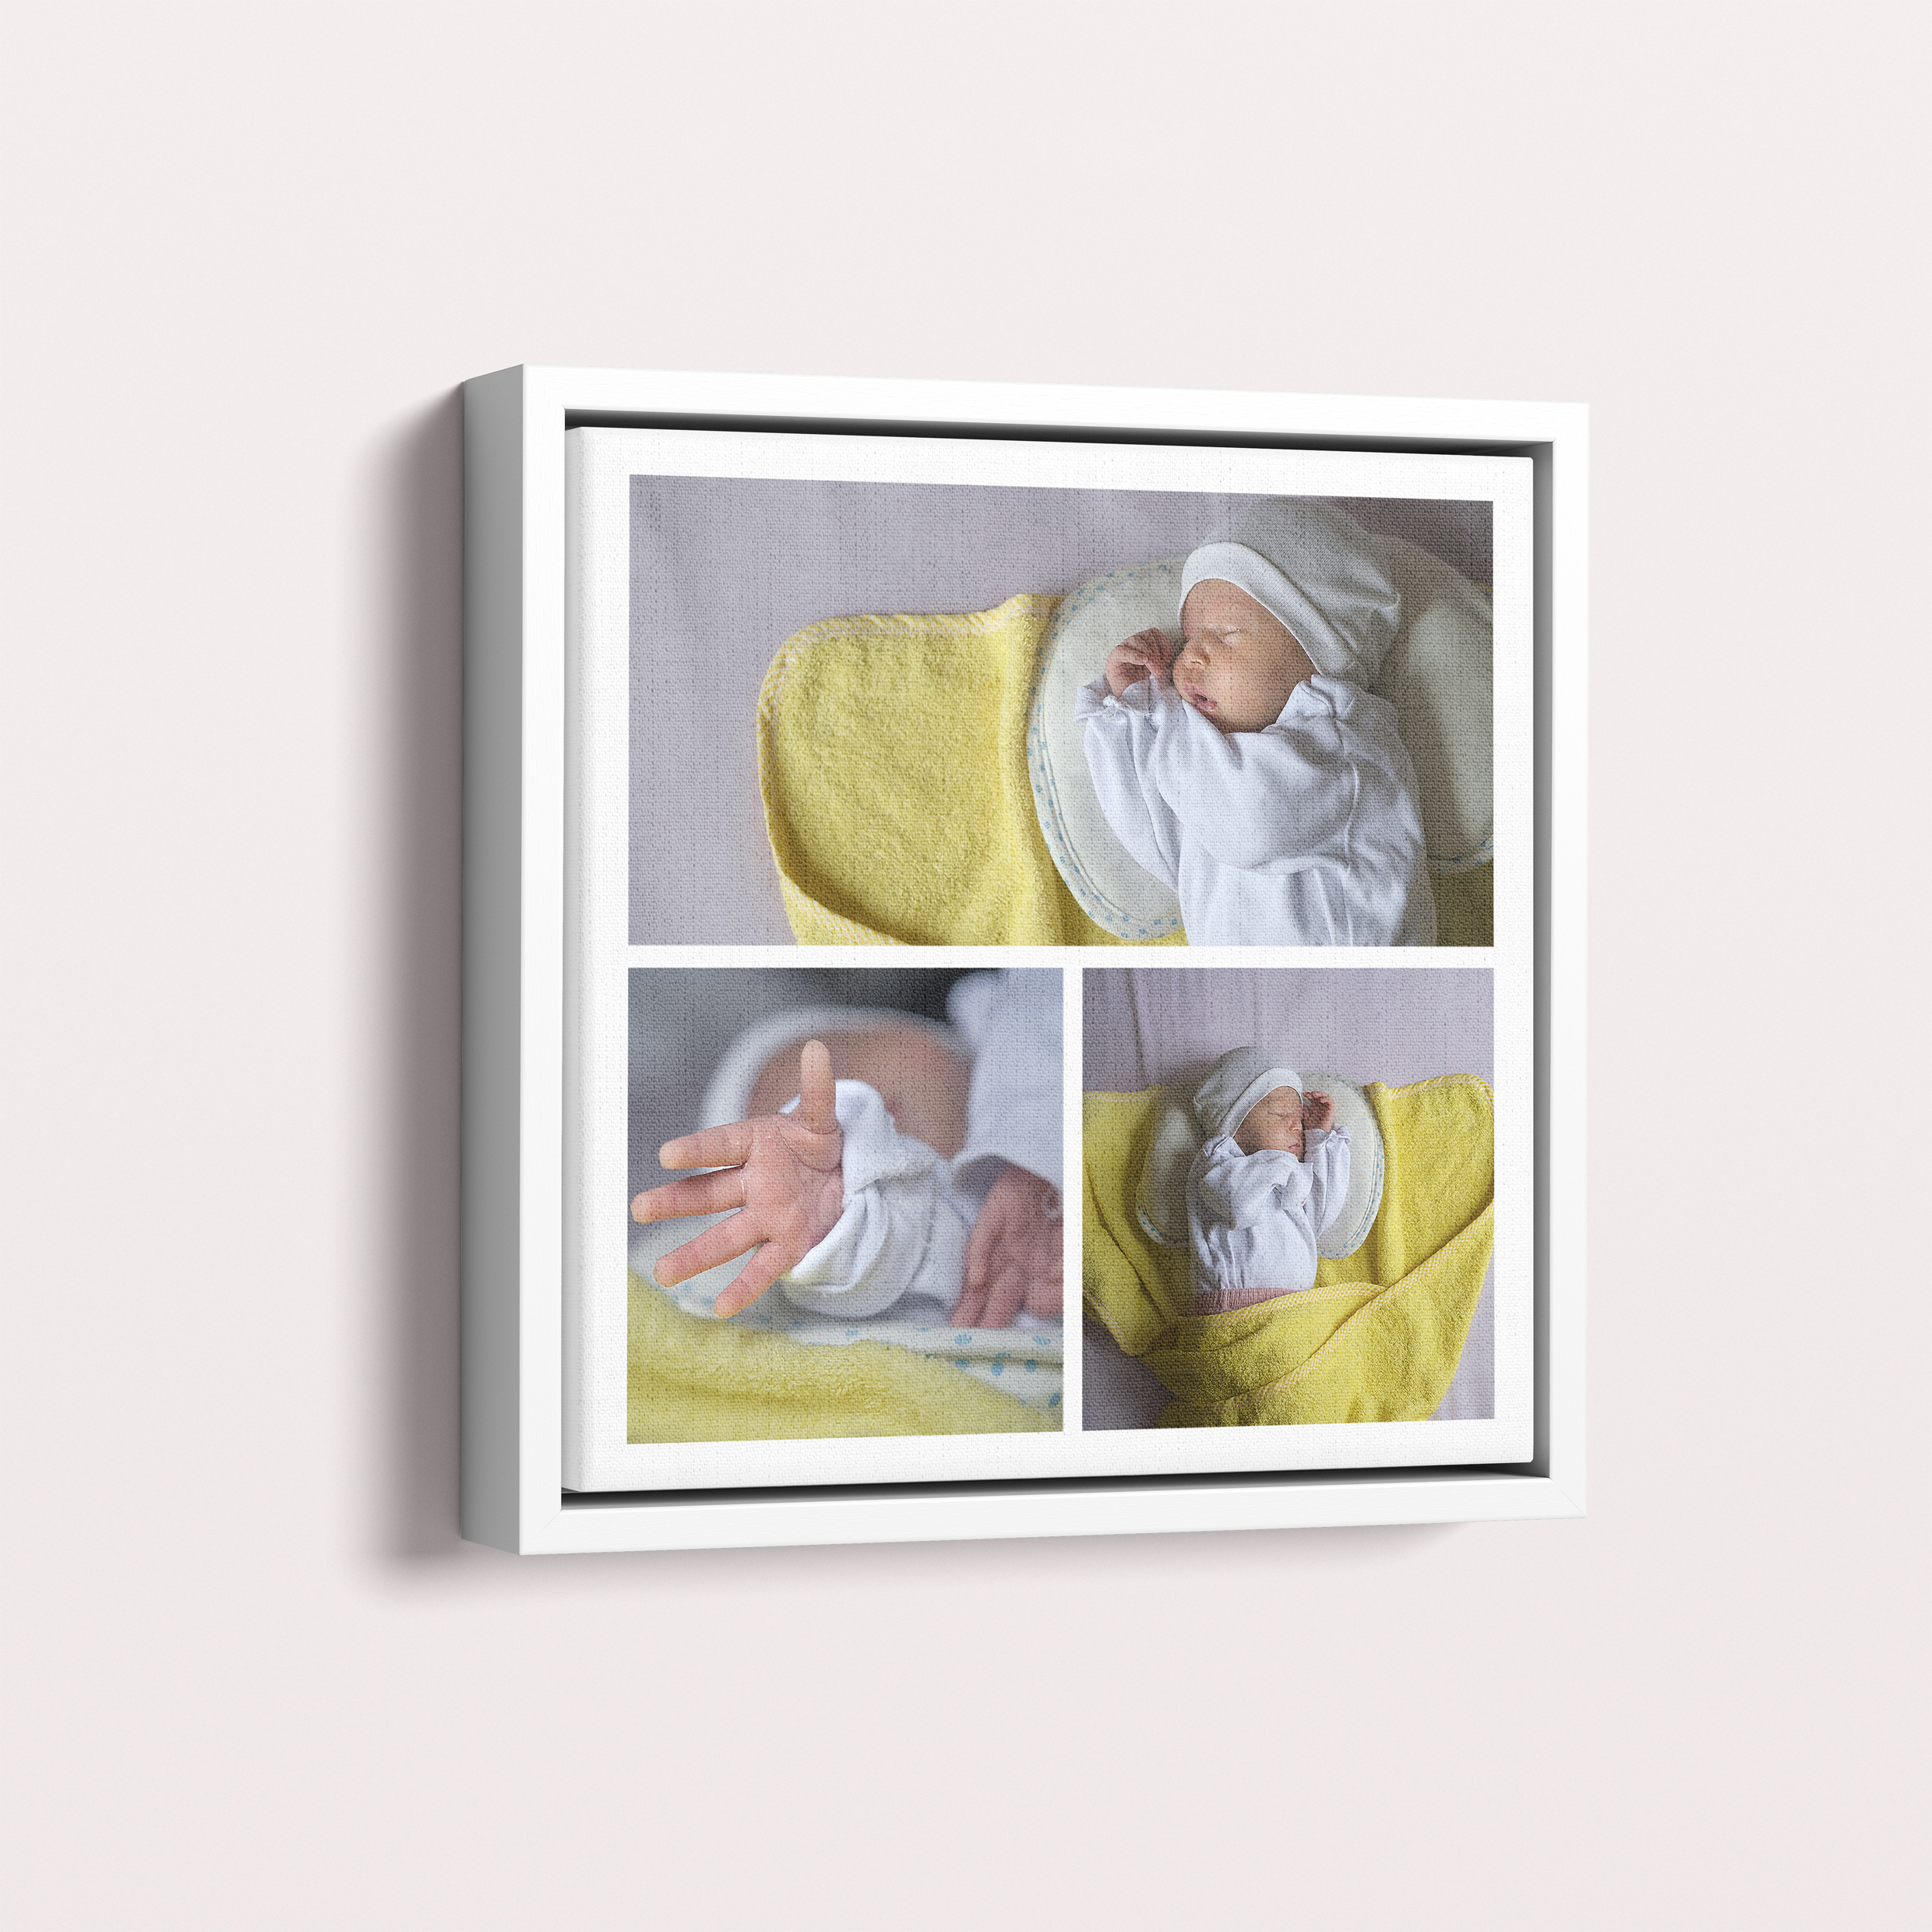 Blossoming Memories Framed Photo Canvas - Preserve up to 4 Cherished Moments with Customizable Wooden Frame